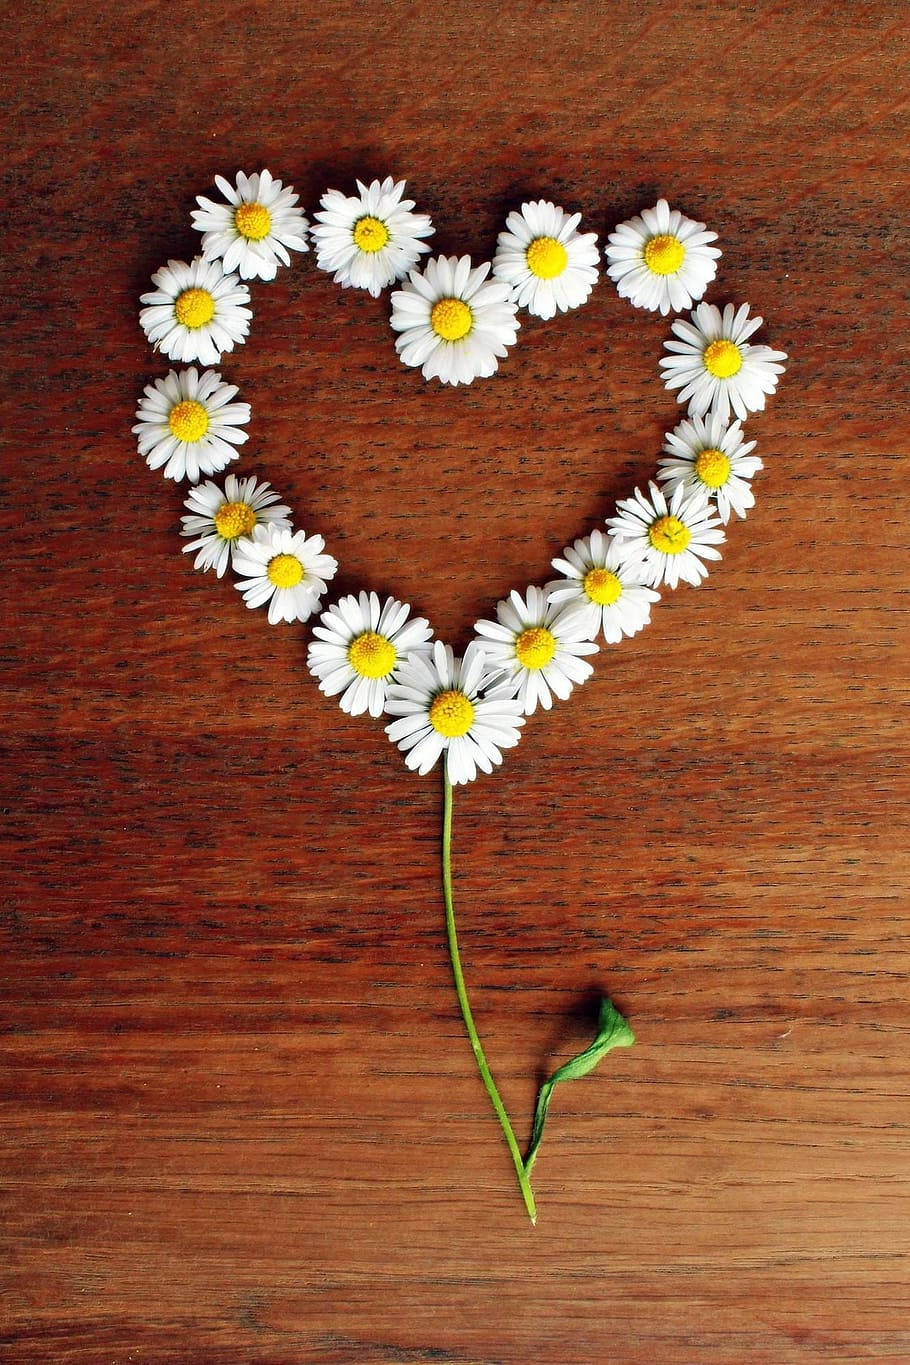 Flower Heart Of Daisies With Stem Wallpaper